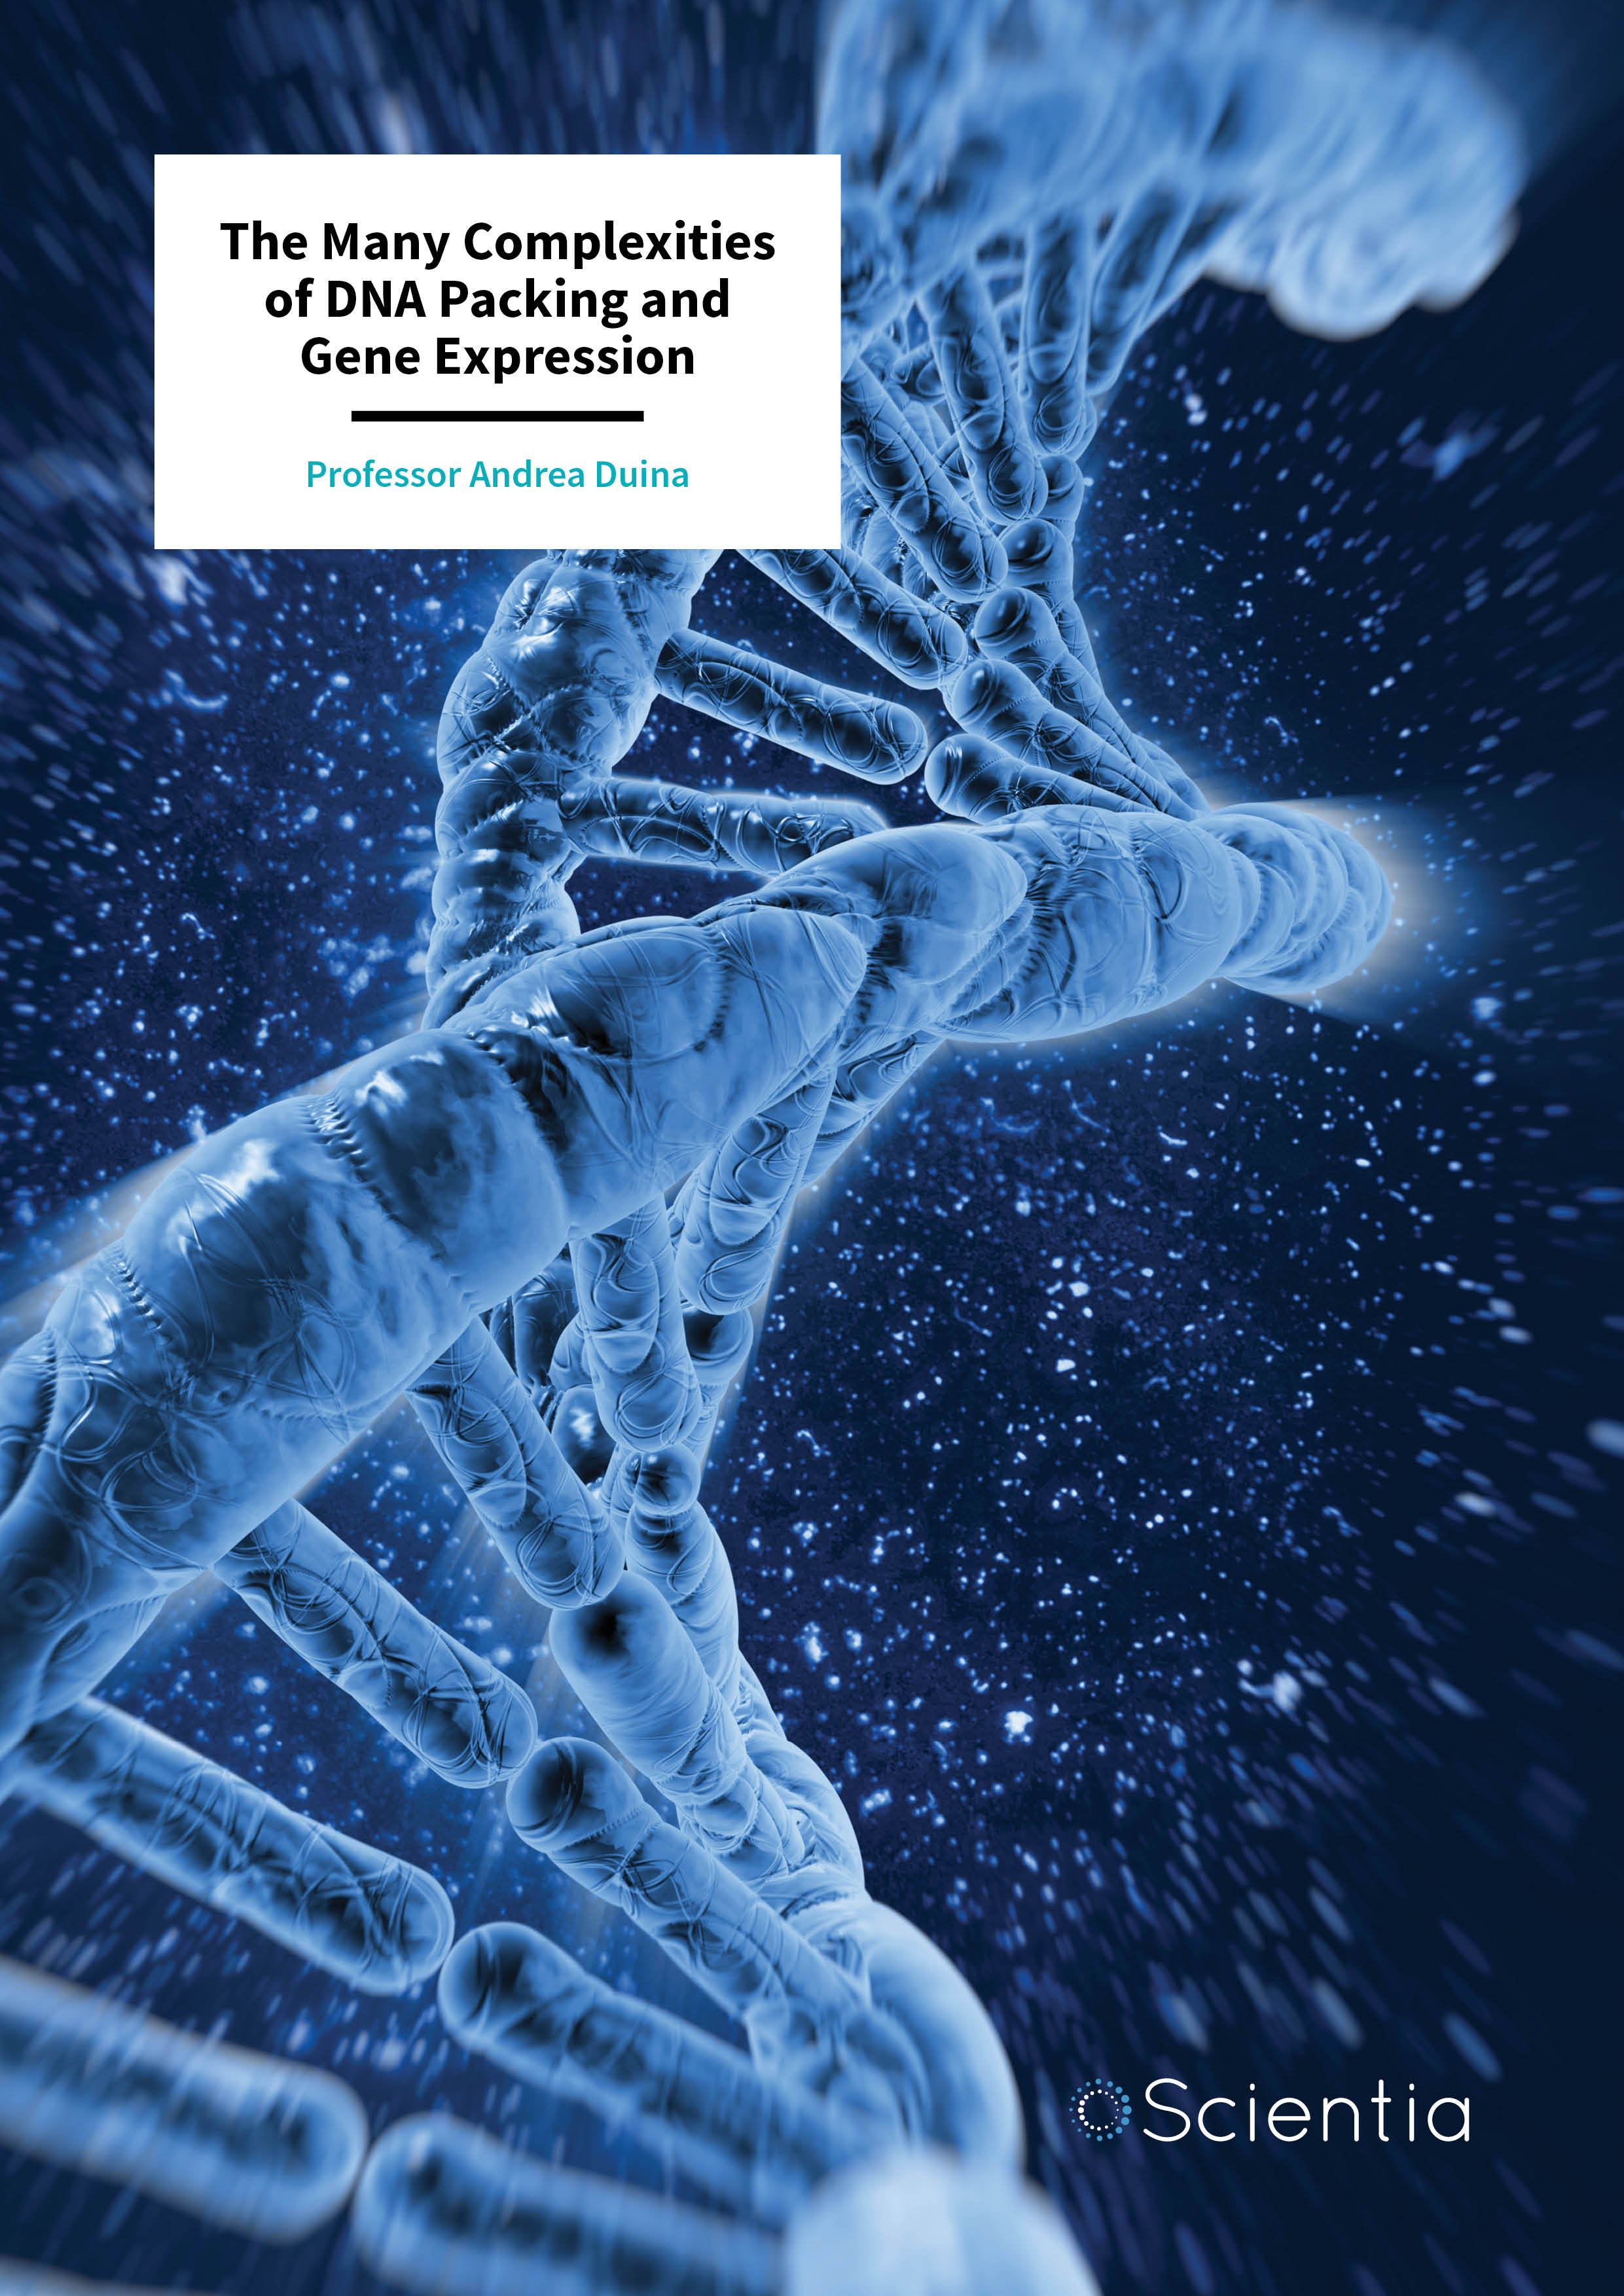 Professor Andrea Duina – The Many Complexities of DNA Packing and Gene Expression